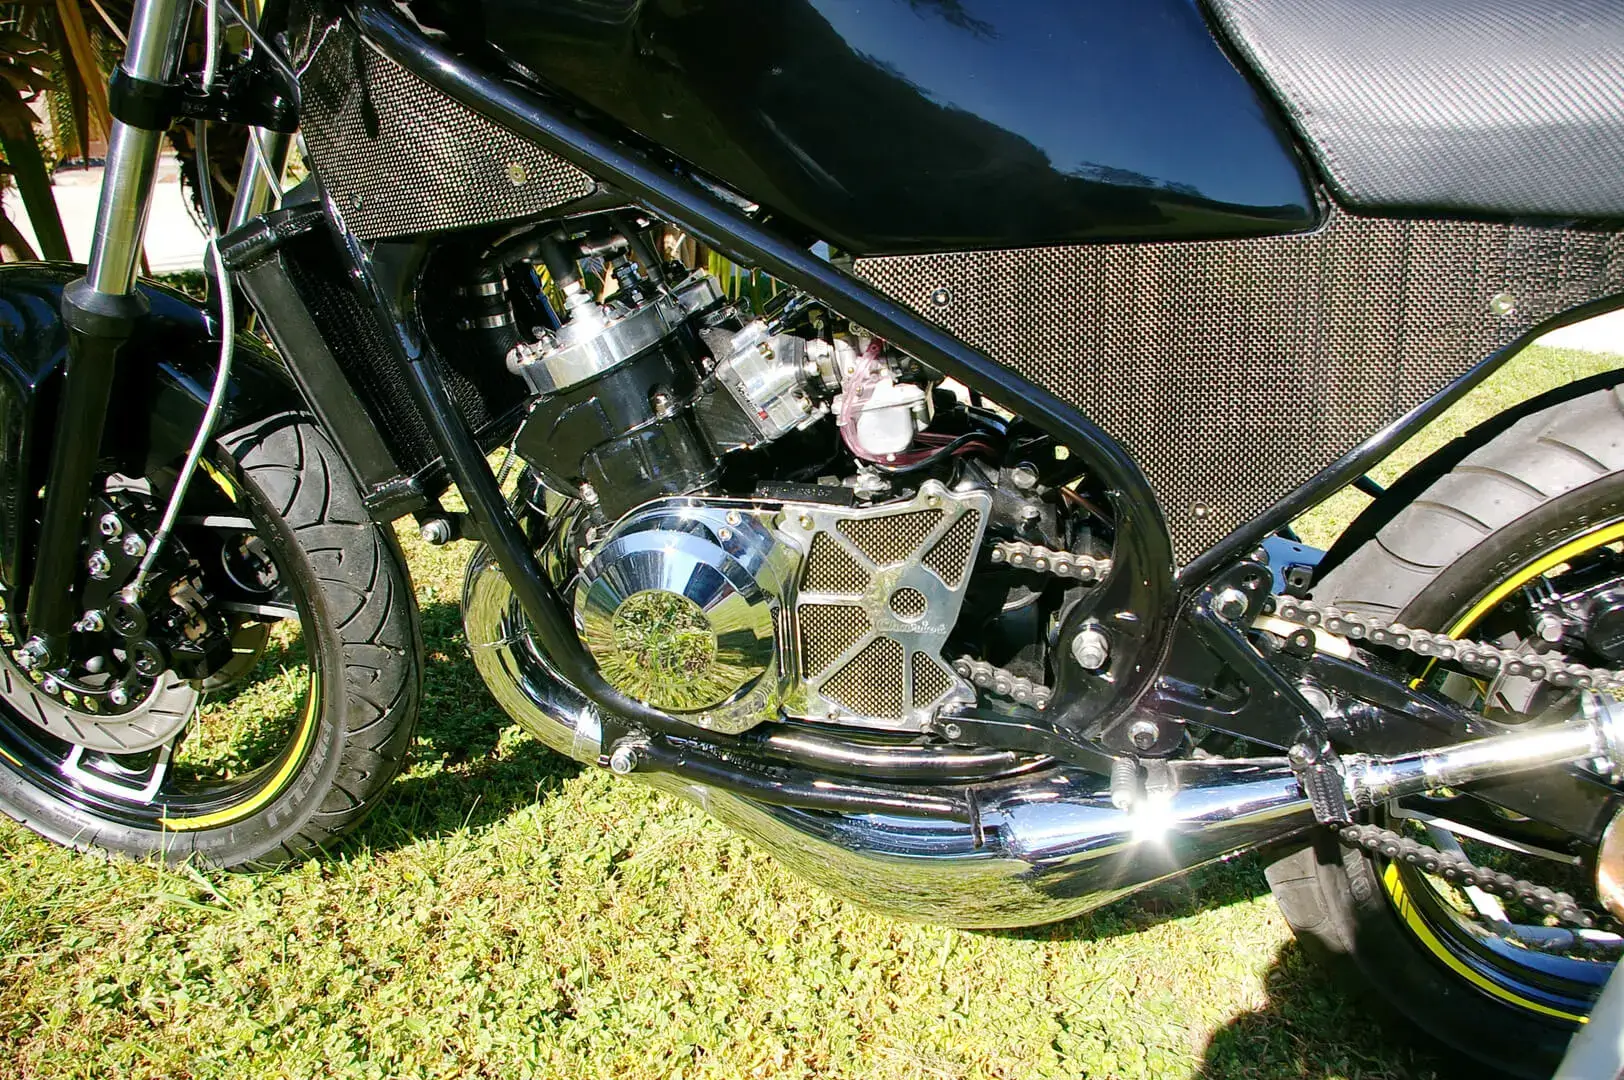 A close up of the engine on a motorcycle.